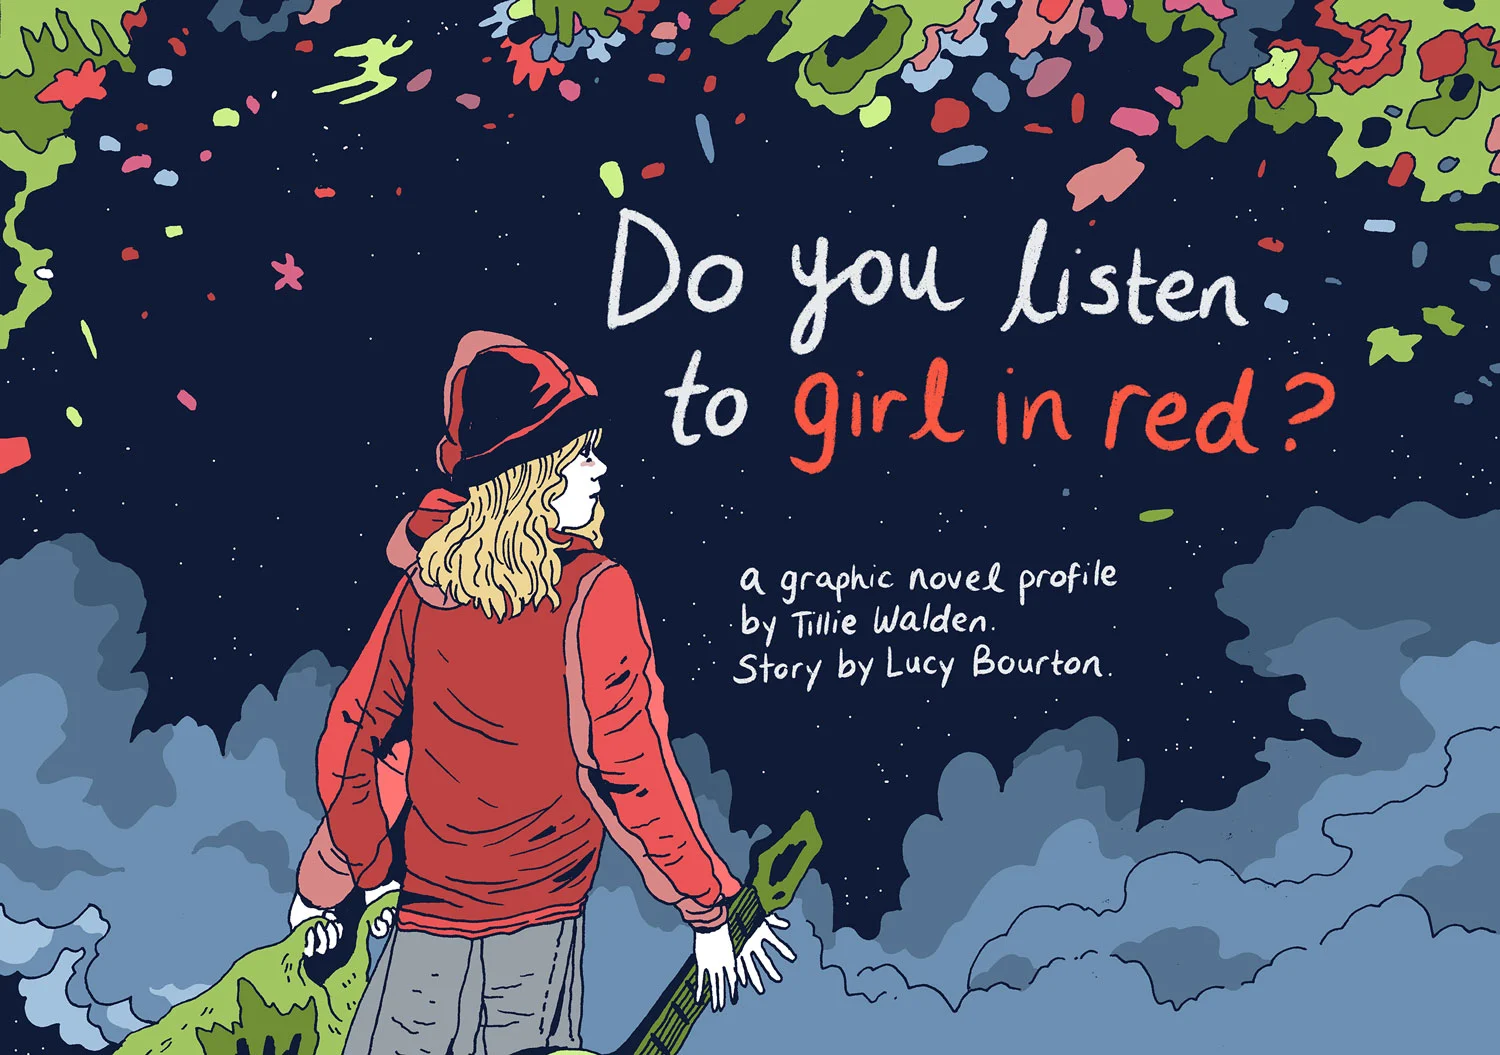 Do you listen to girl in red?